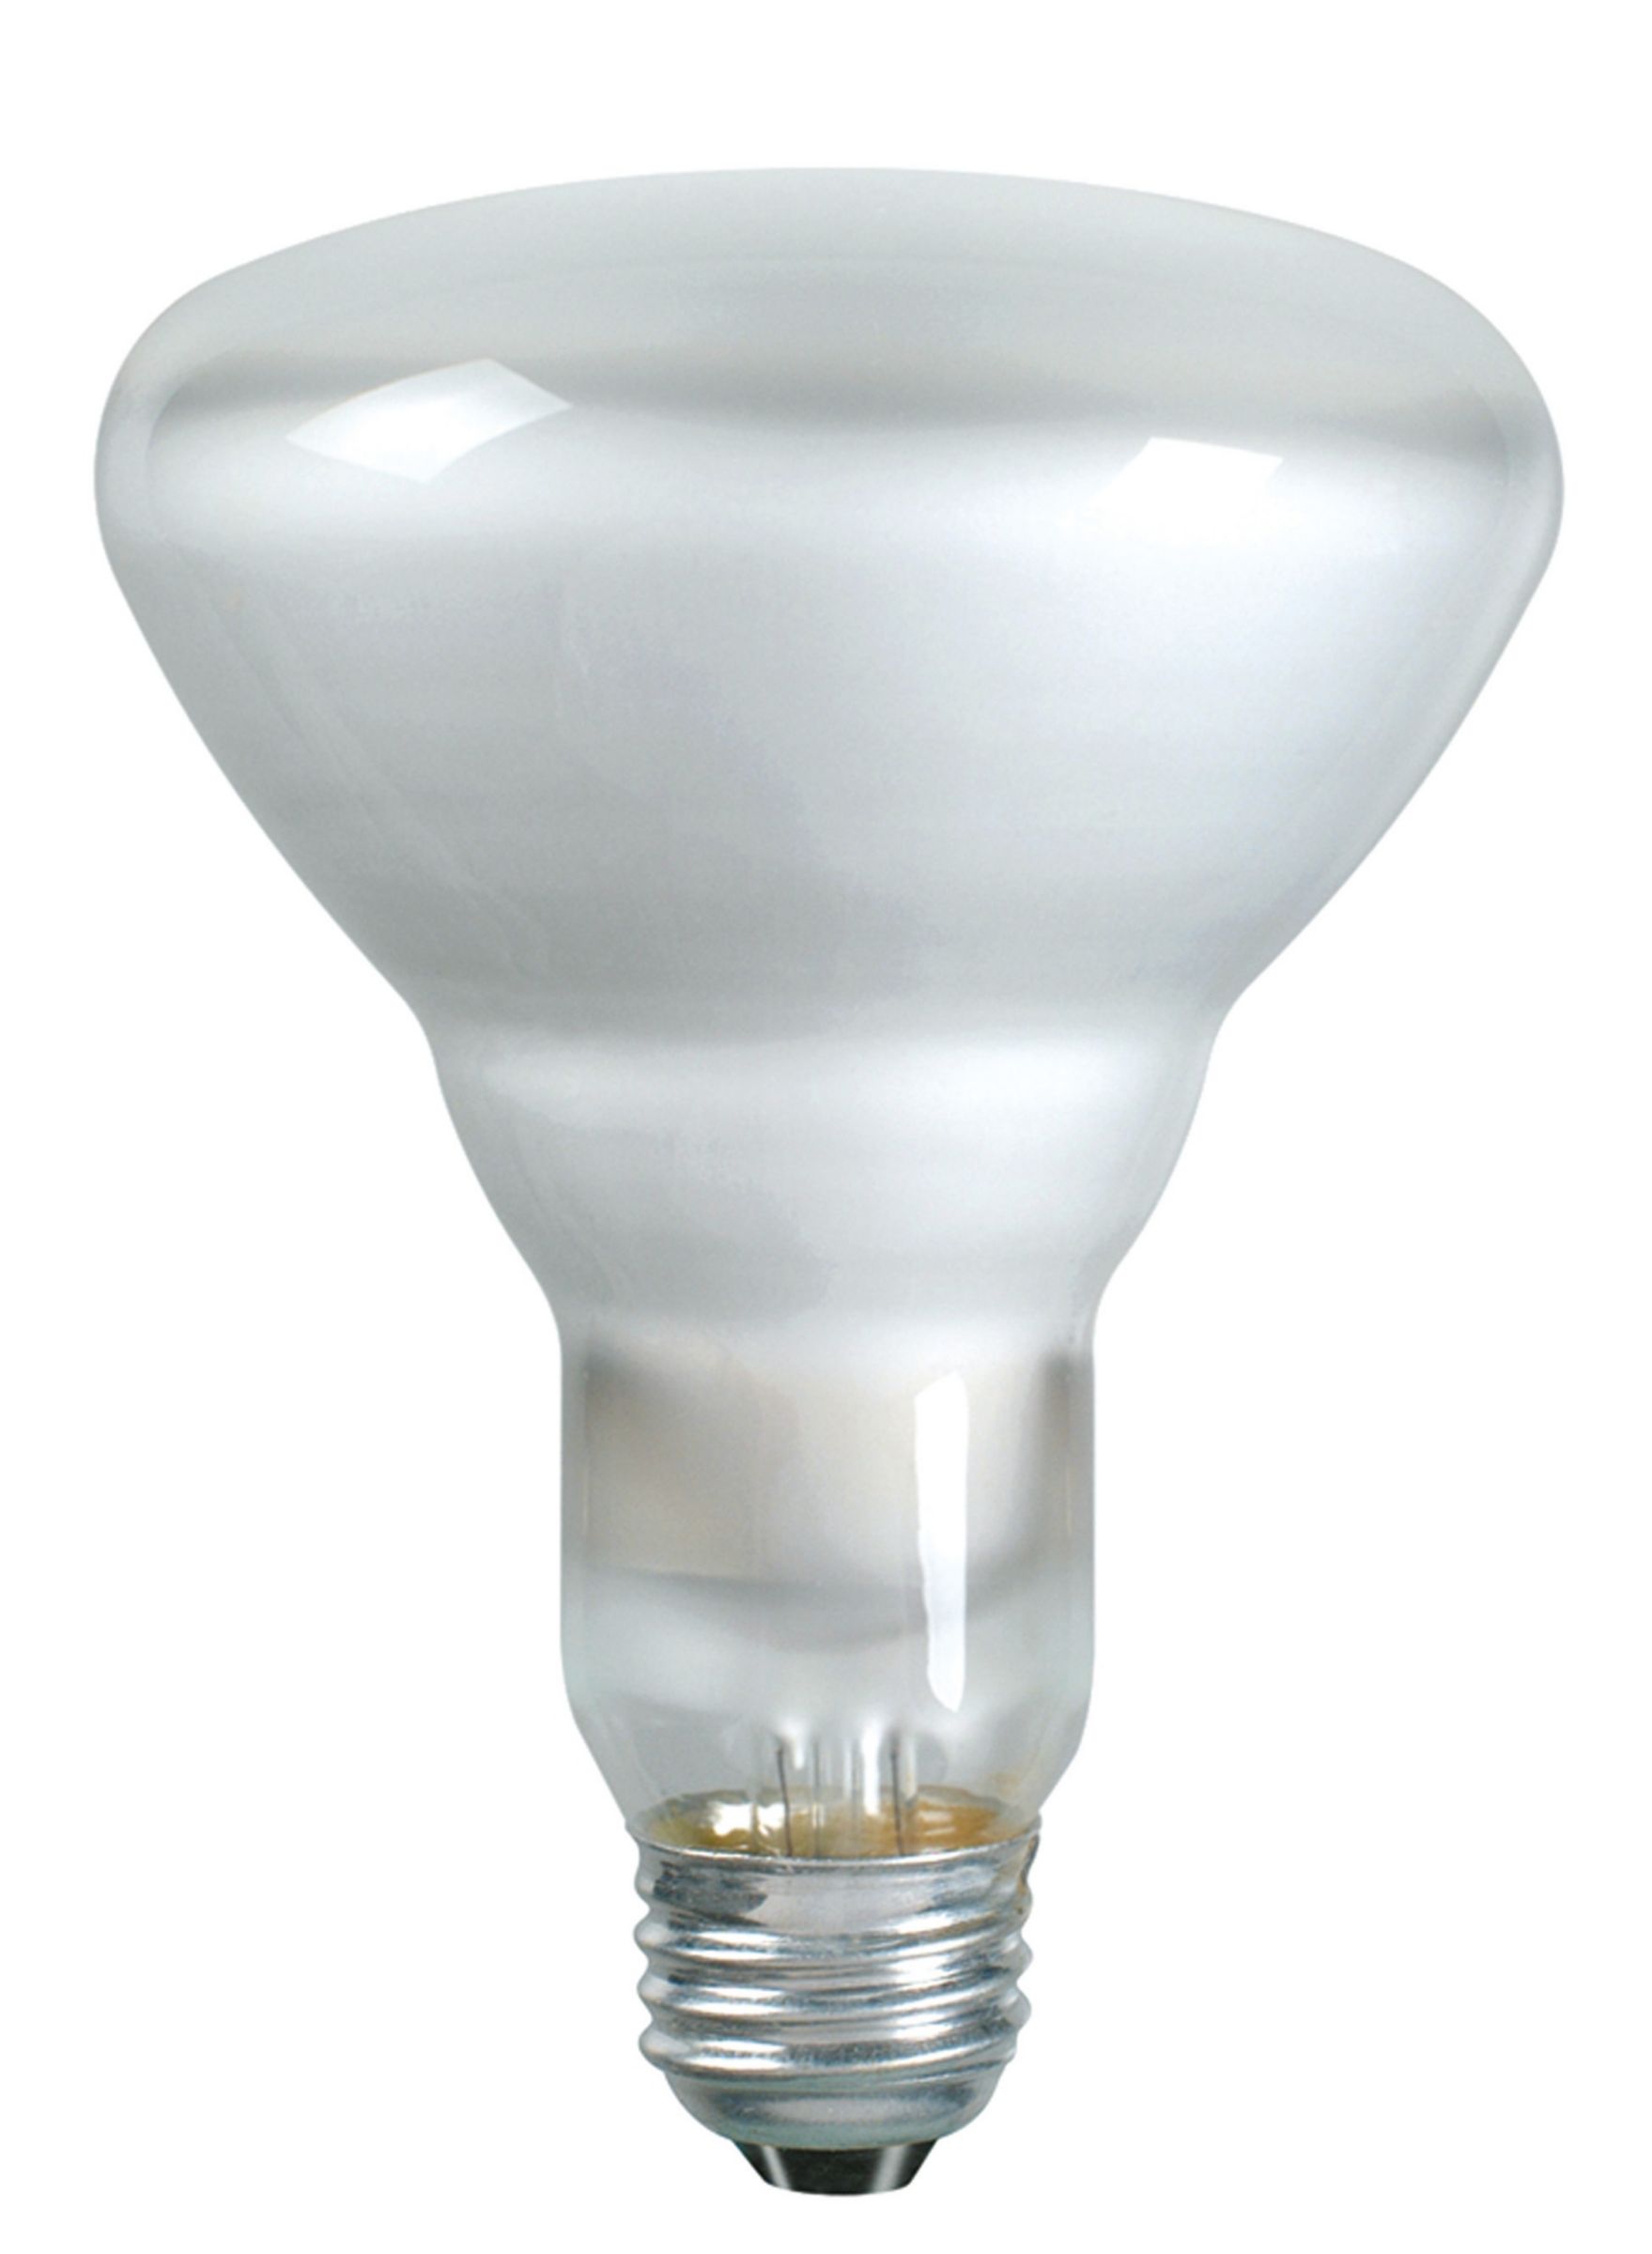 24884-9 (65BR30/FL55) Incandescent Lamp Philips Lighting;Signify Lamps